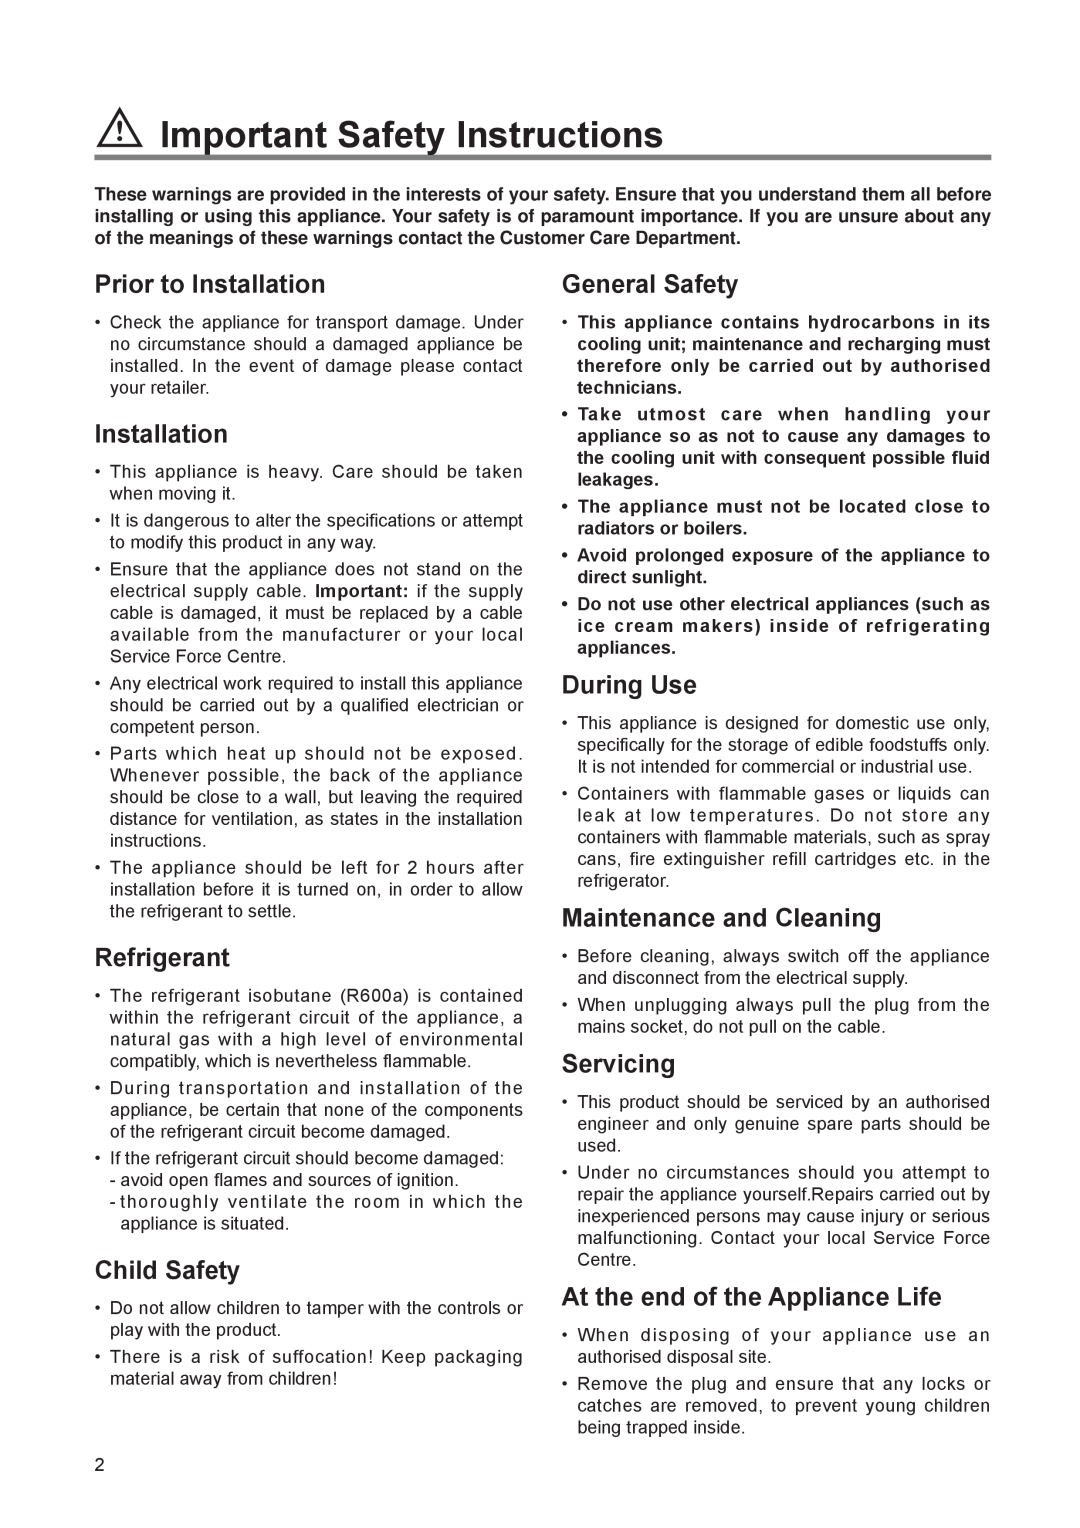 Zanussi ZEL 140 W manual Important Safety Instructions, Prior to Installation, Refrigerant, Child Safety, General Safety 